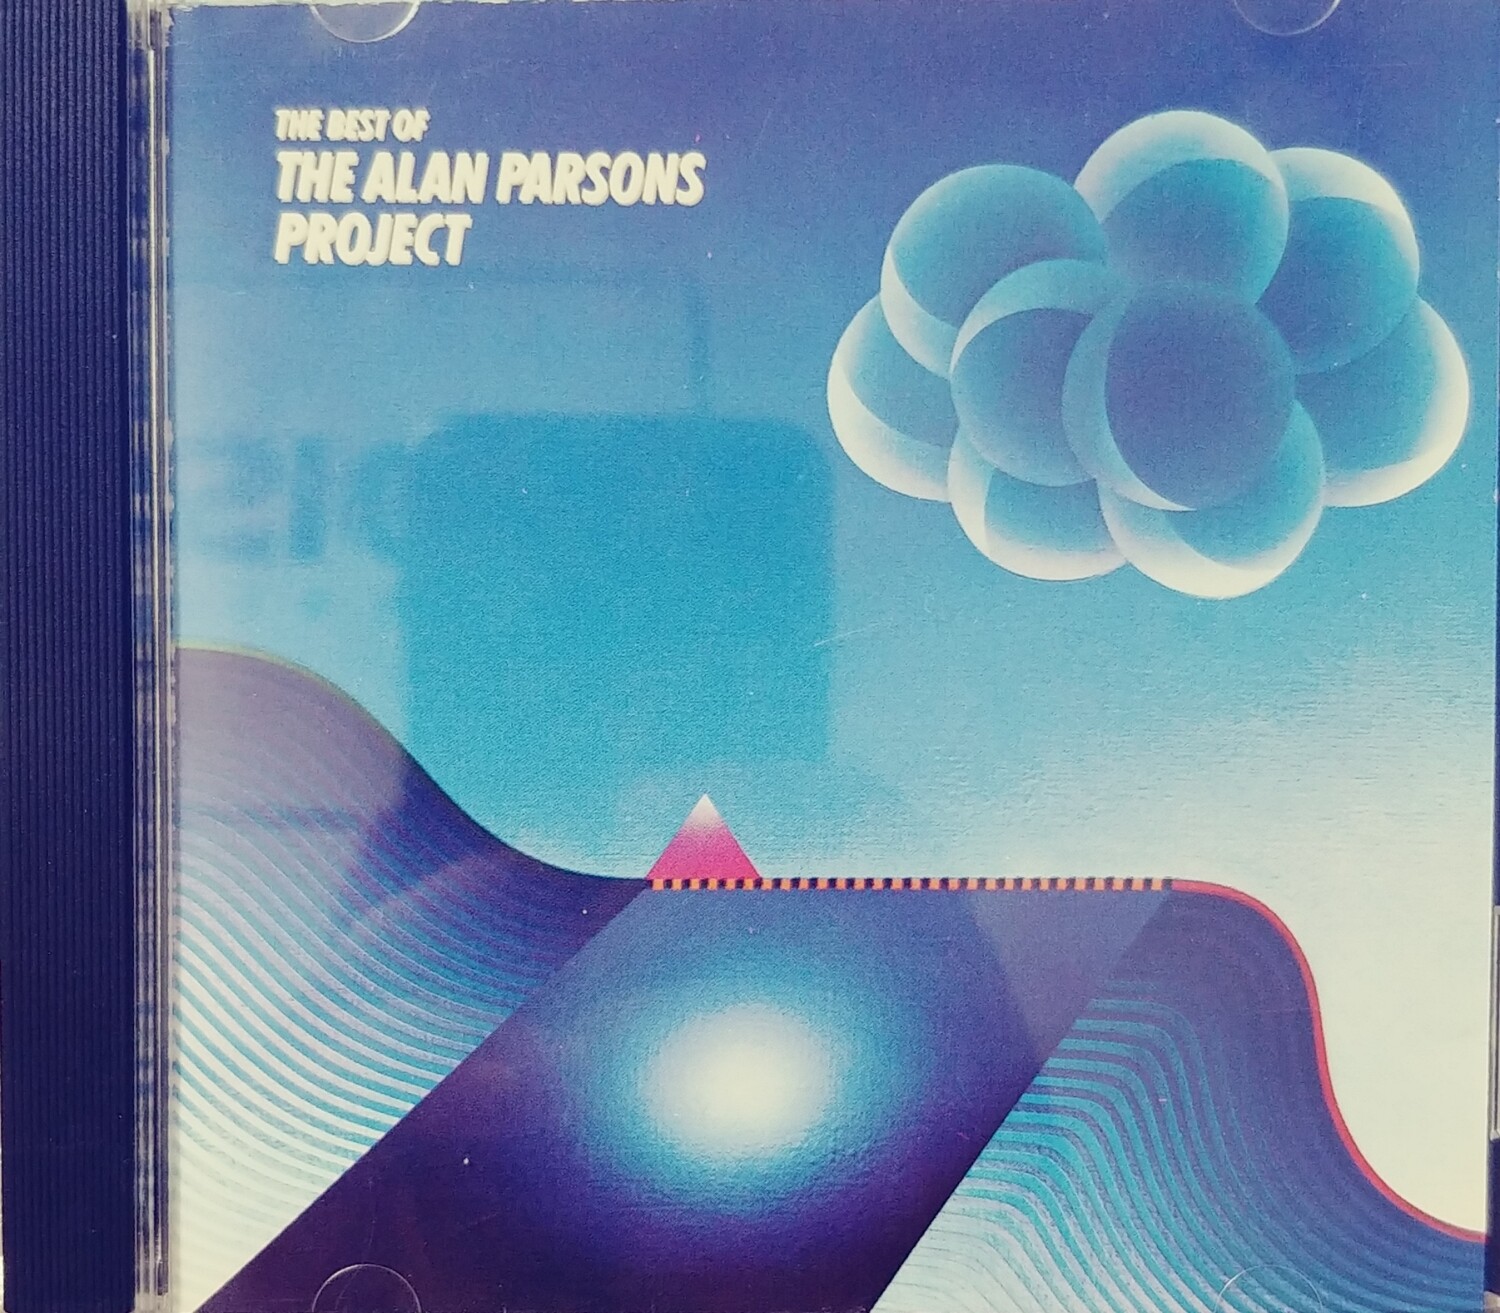 The Alan Parsons Project - The Best of (CD)